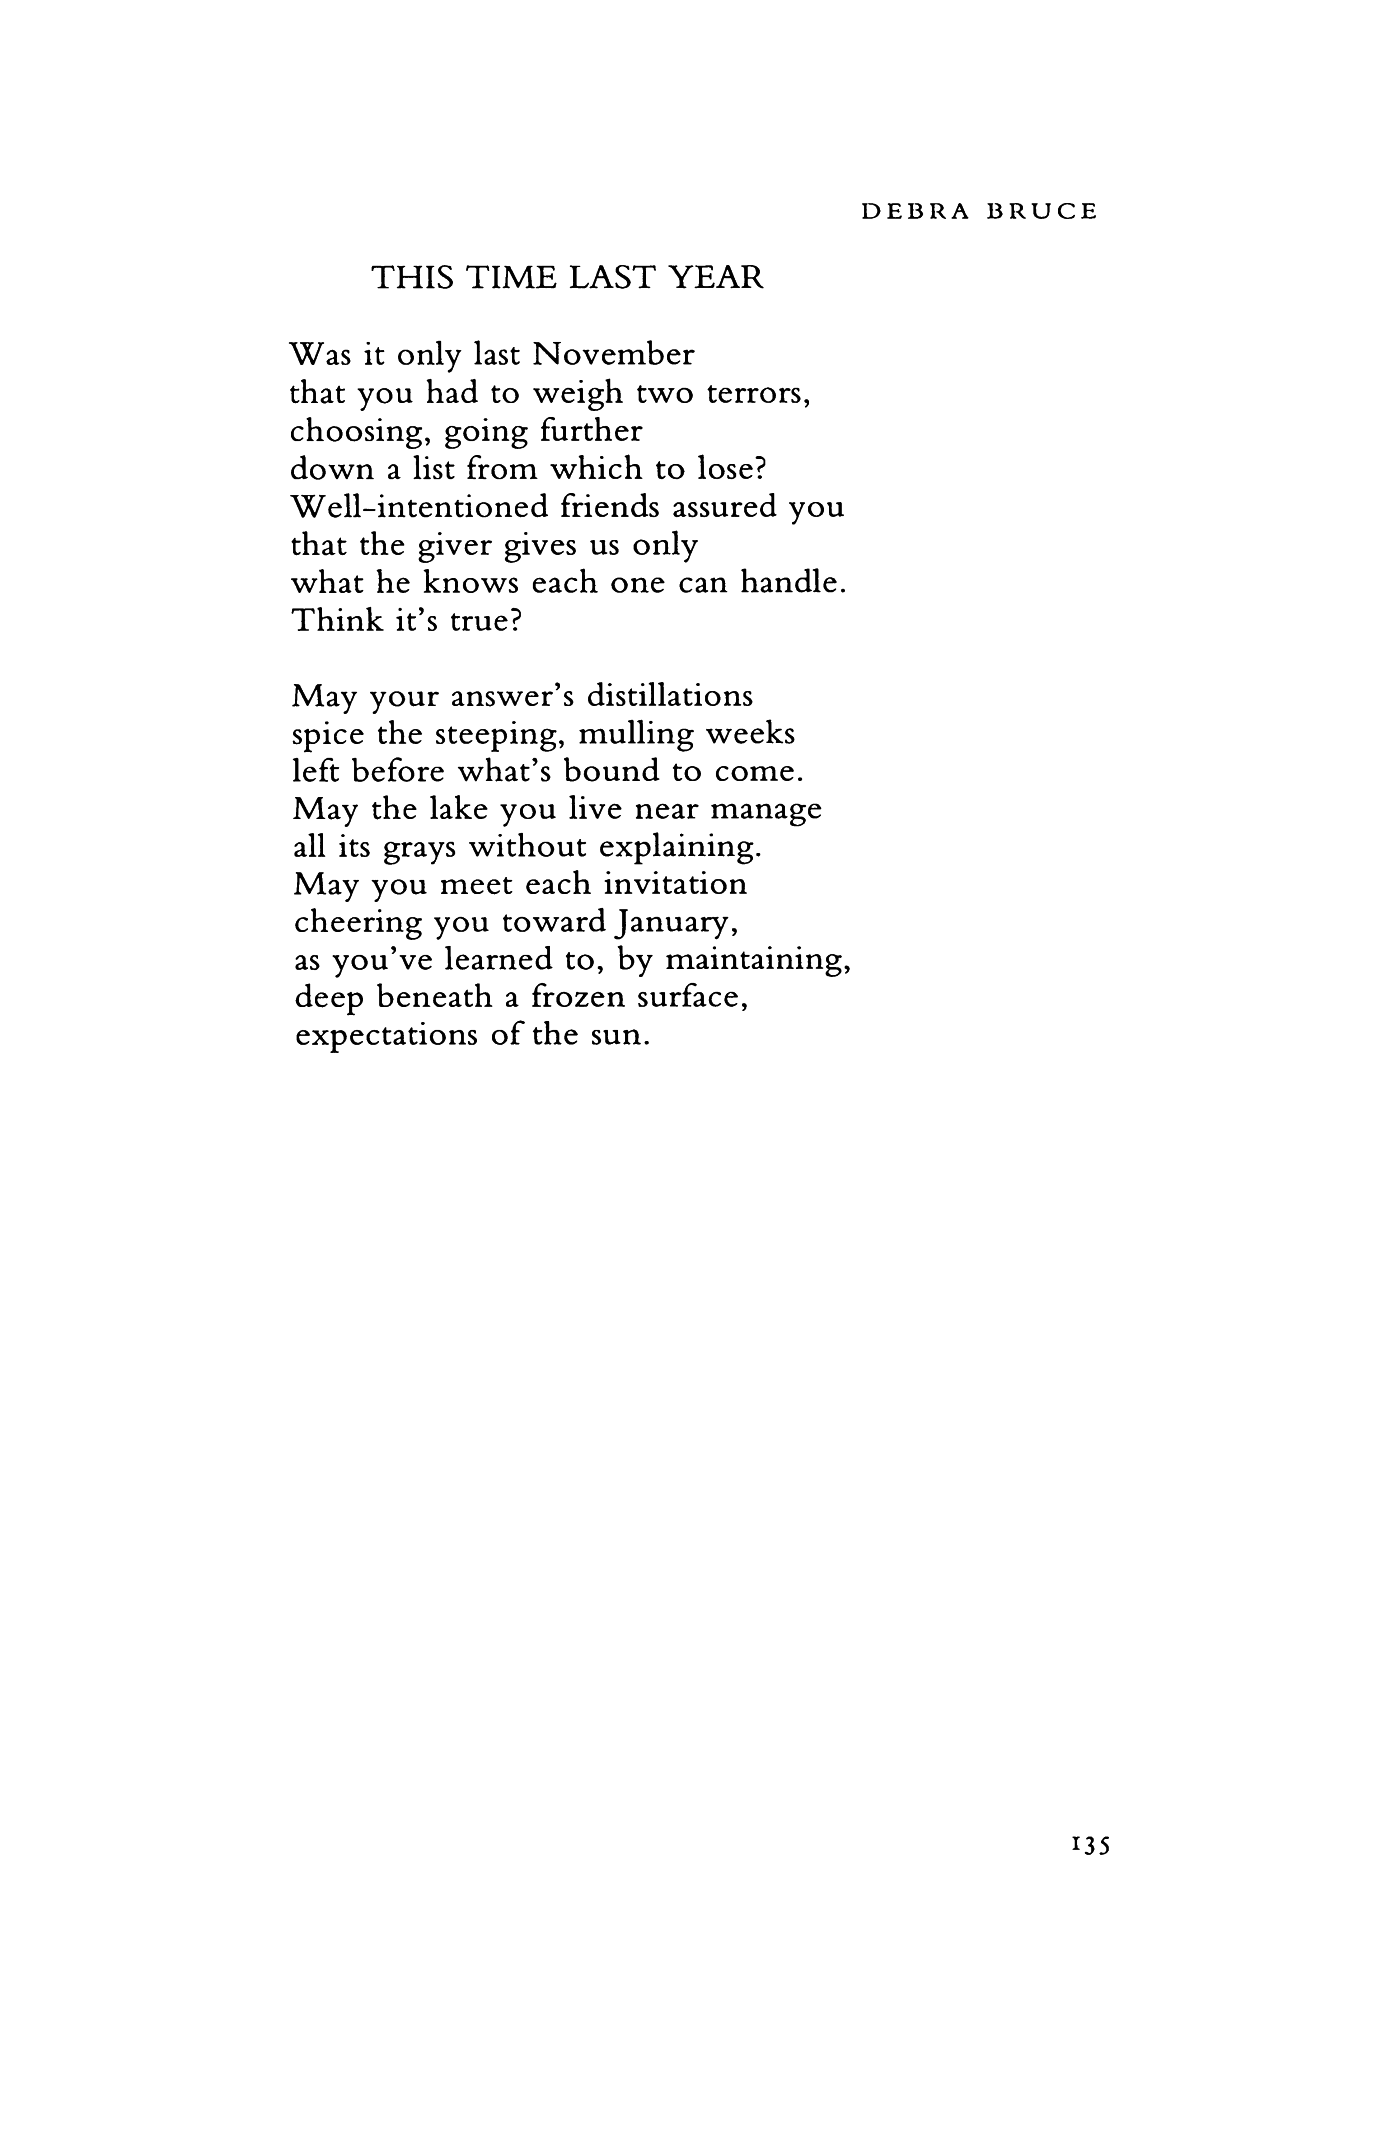 that time of year poem